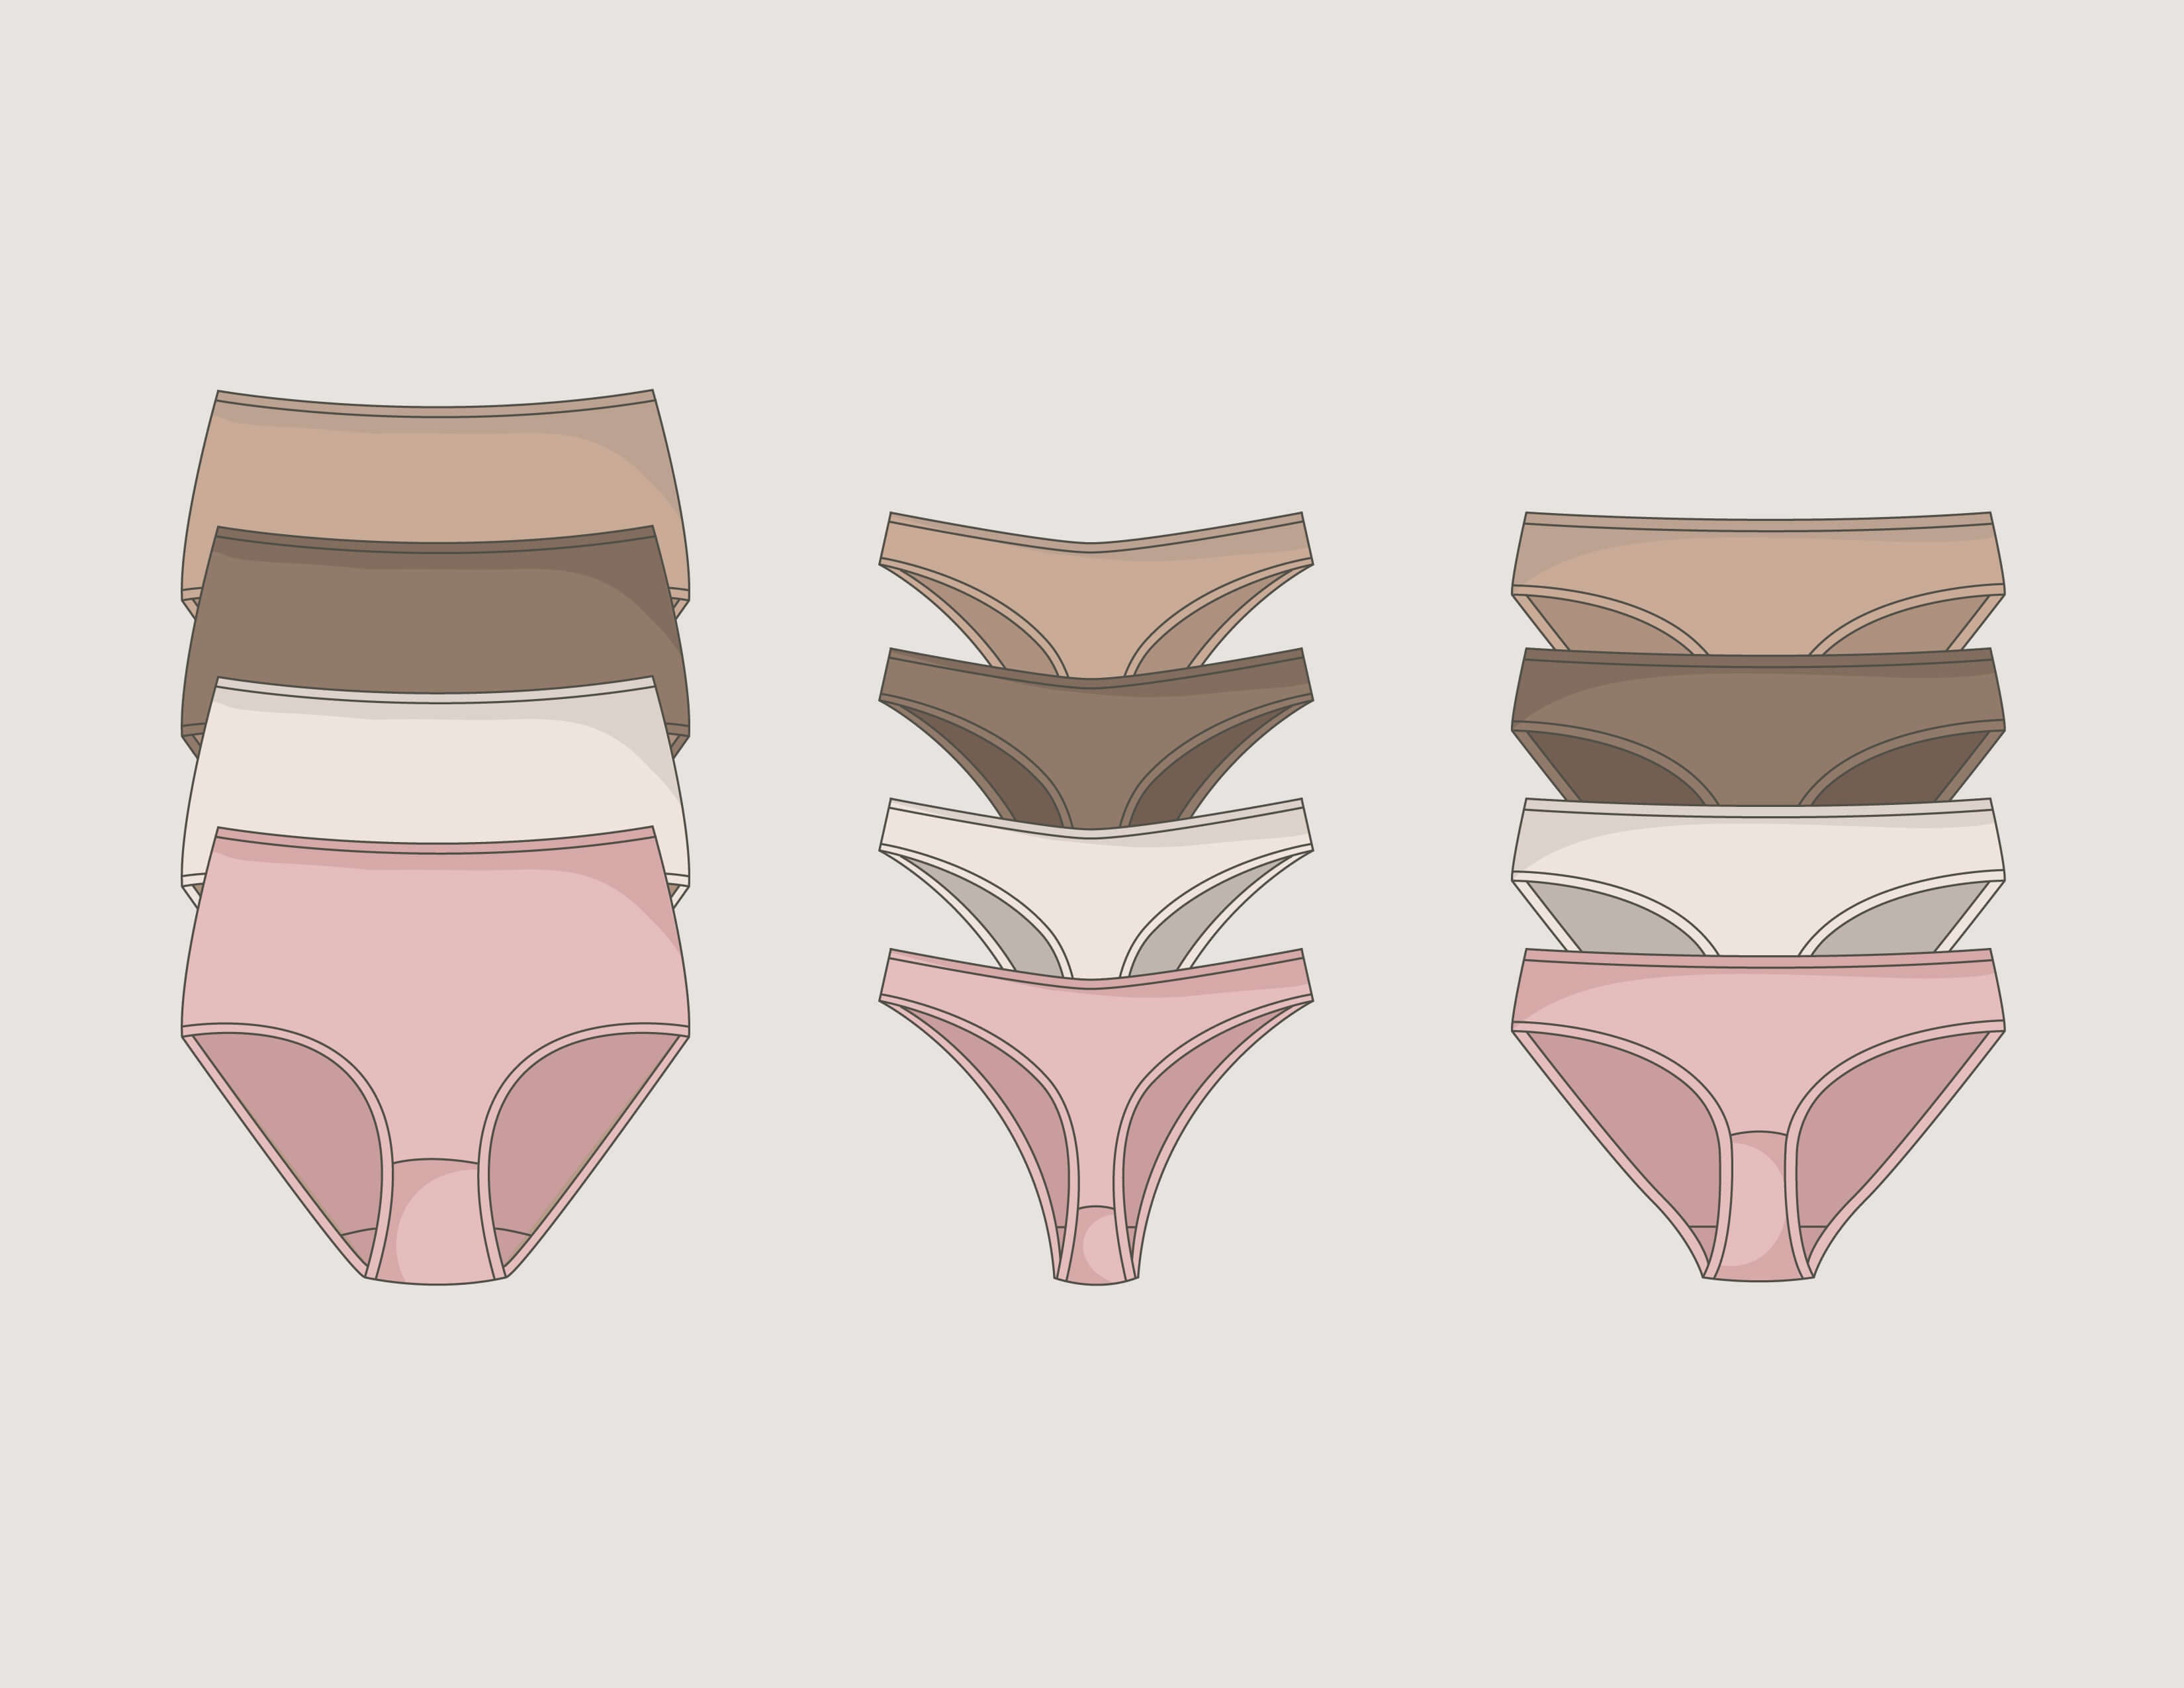 A Panties' or 'a Pair of Panties'. Which Is Correct?